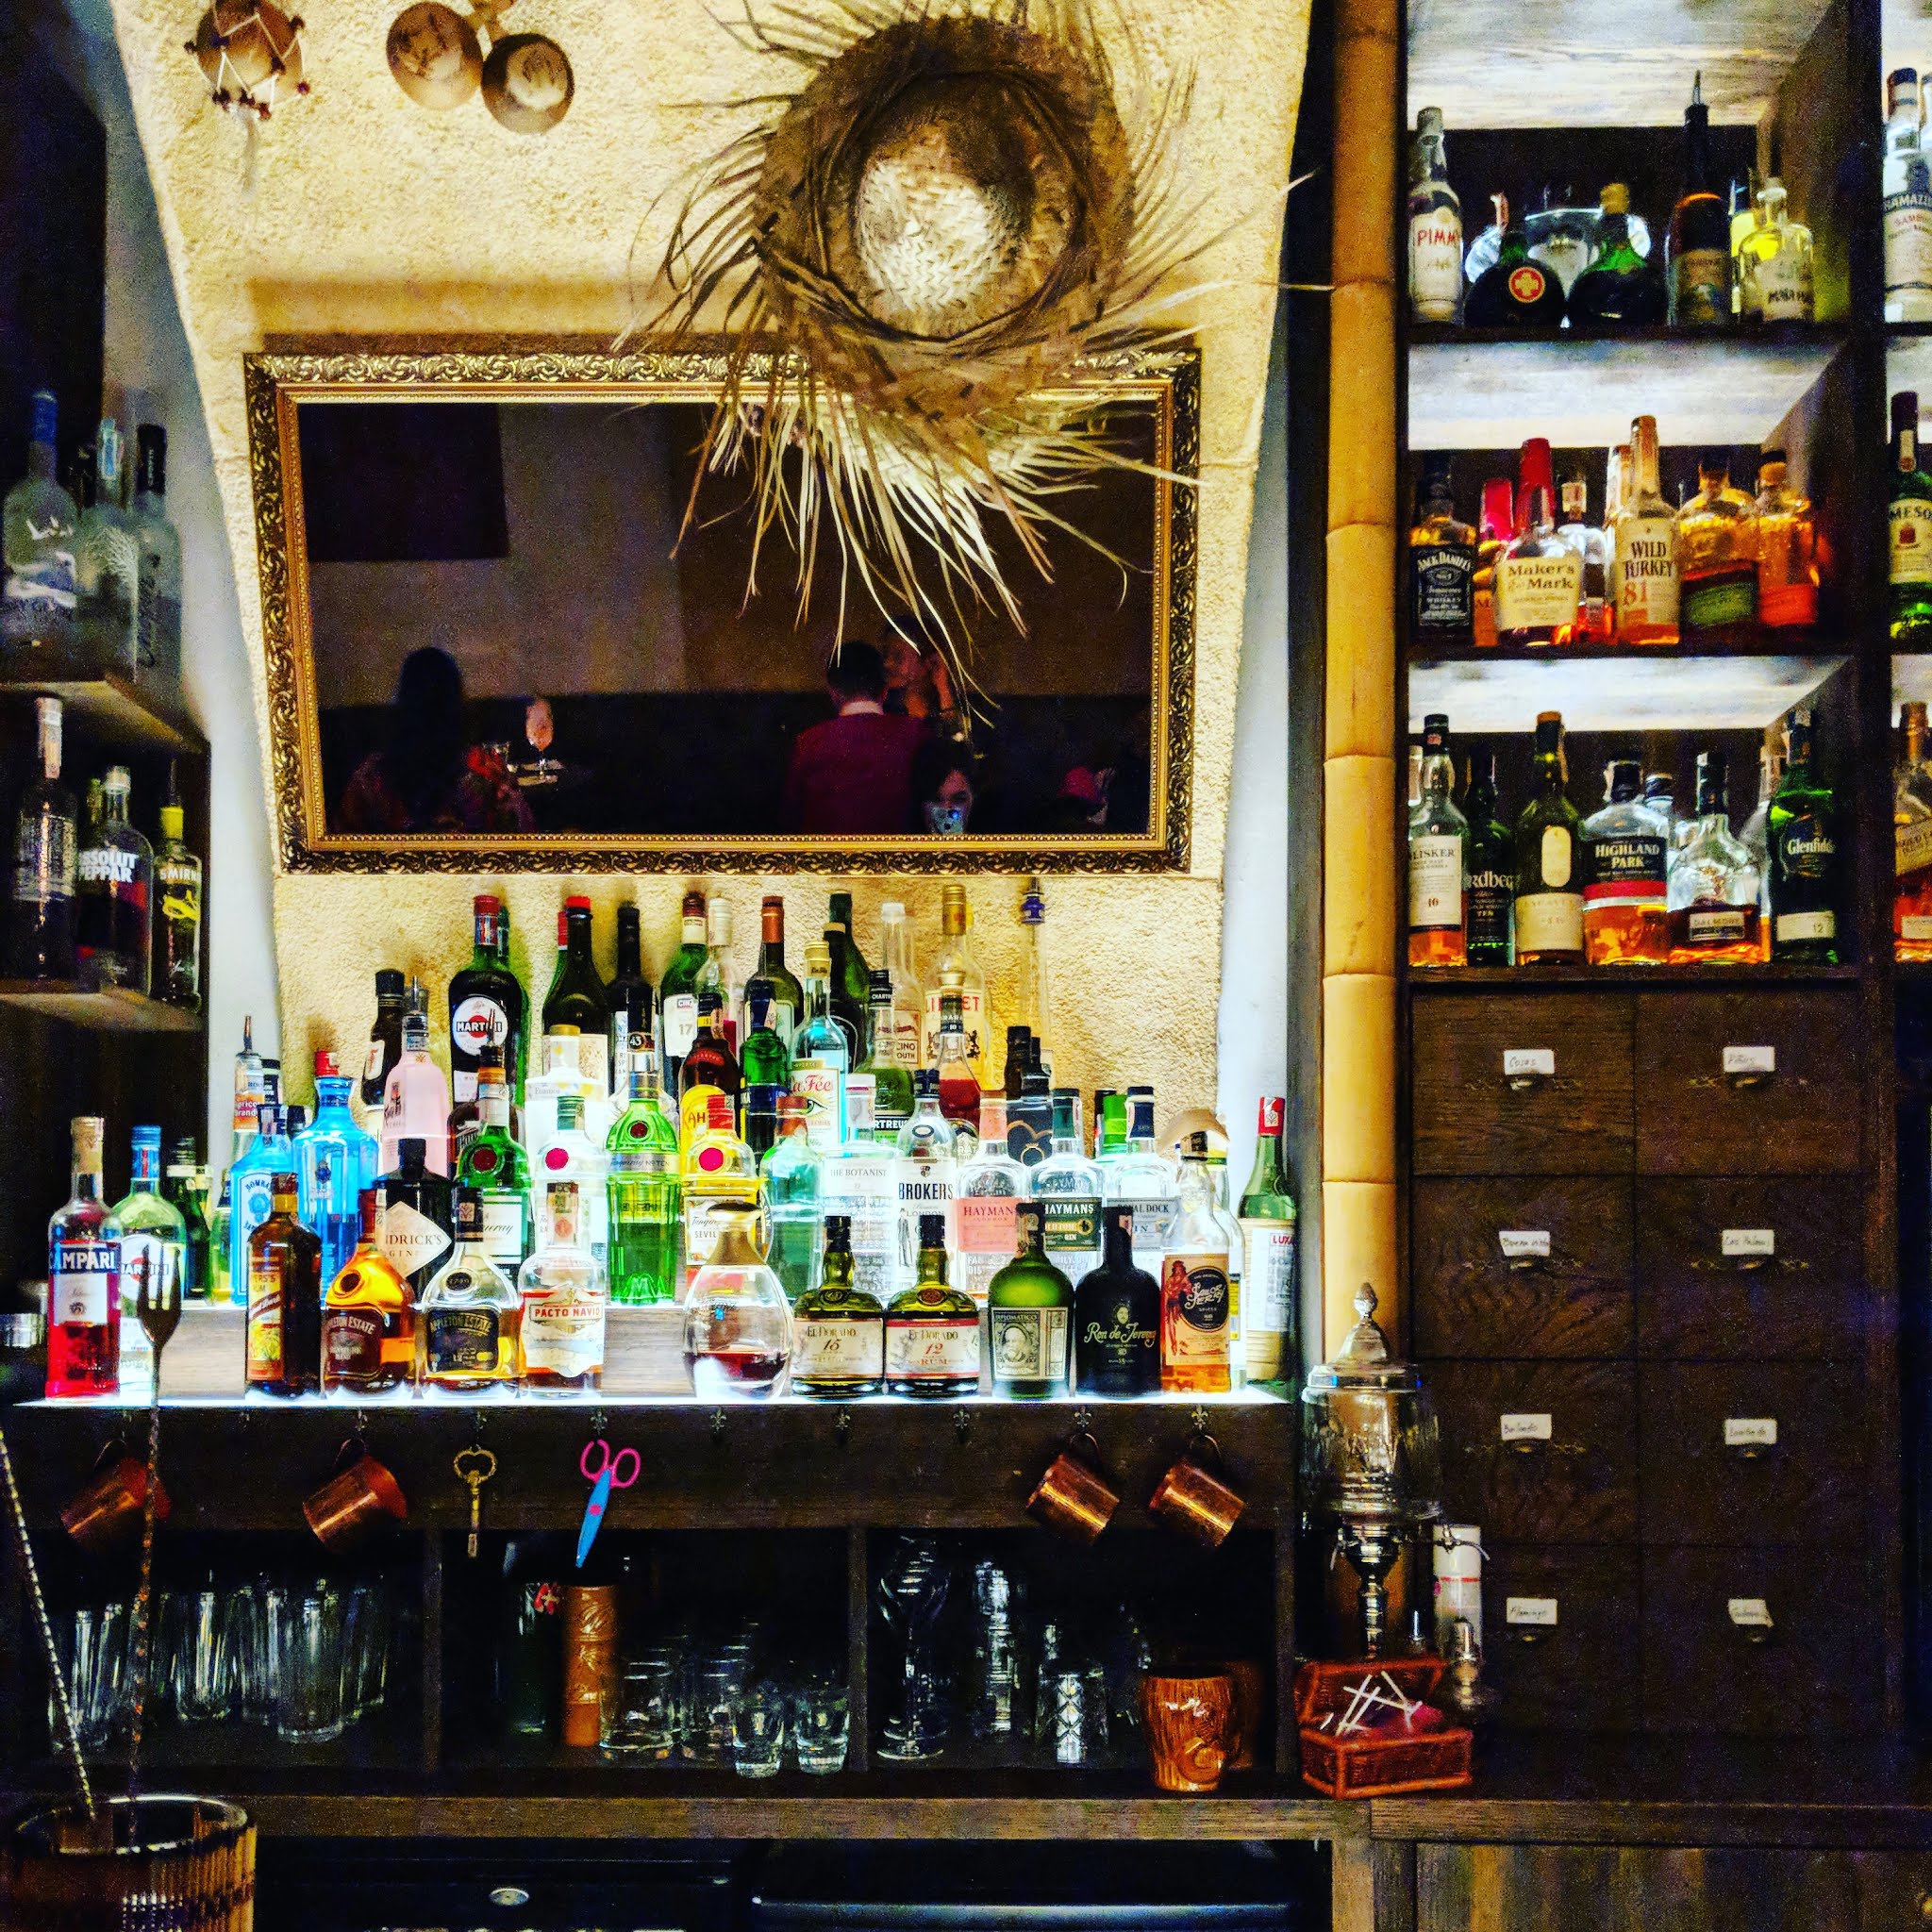 dimly lit bar with mirror straw hat and bottles of alcohol